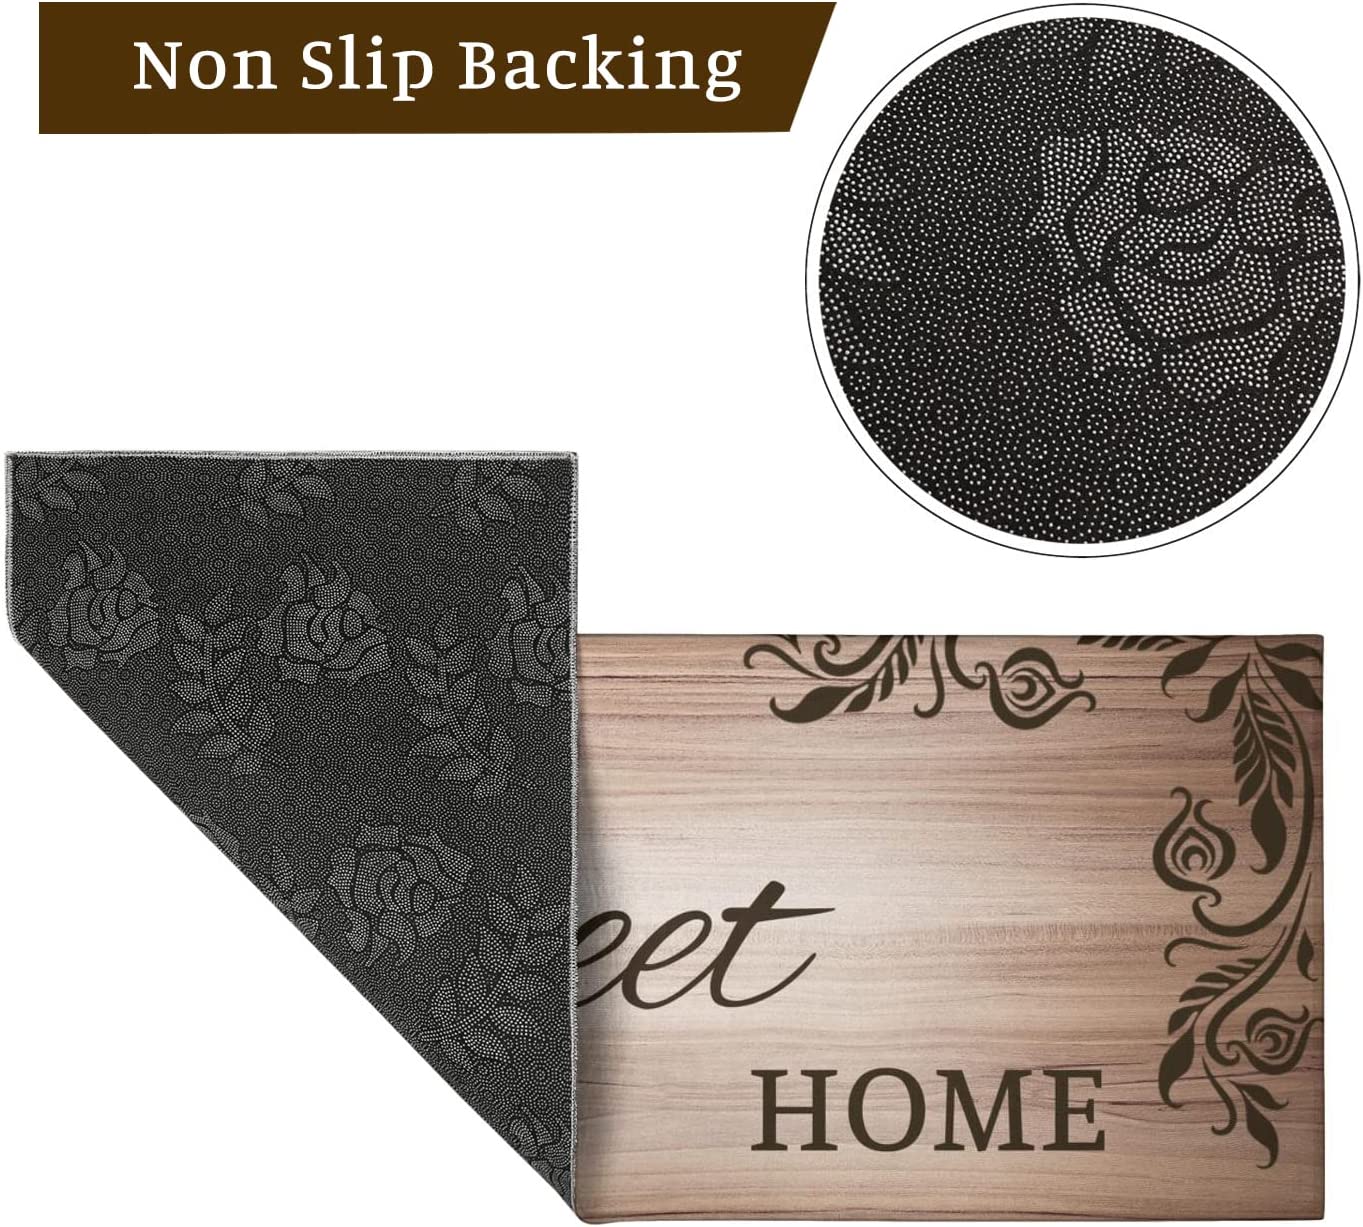 Kitchen Mats Floor Home Sweet Home - Kitchen Mat Set of 2, Brown Kitchen Rug, Farmhouse Kitchen Rugs for Kitchen Sink Area, Kitchen Sink Rugs and Mats, Kitchen Rugs with Words, 17x24 and 17x48 Inch - image 4 of 5